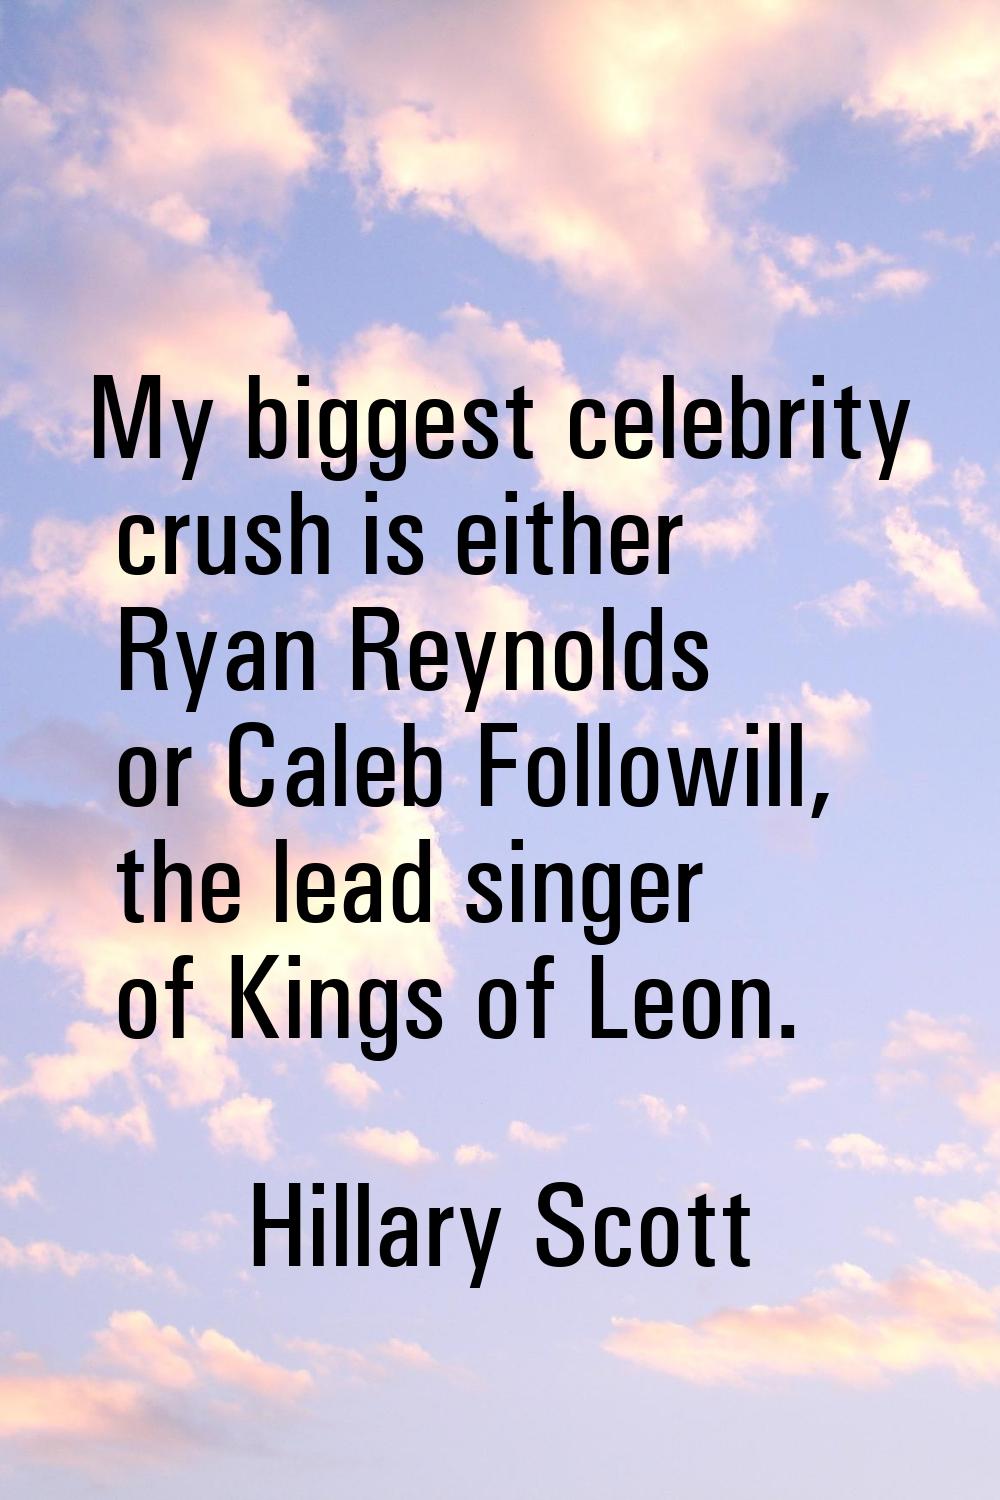 My biggest celebrity crush is either Ryan Reynolds or Caleb Followill, the lead singer of Kings of 